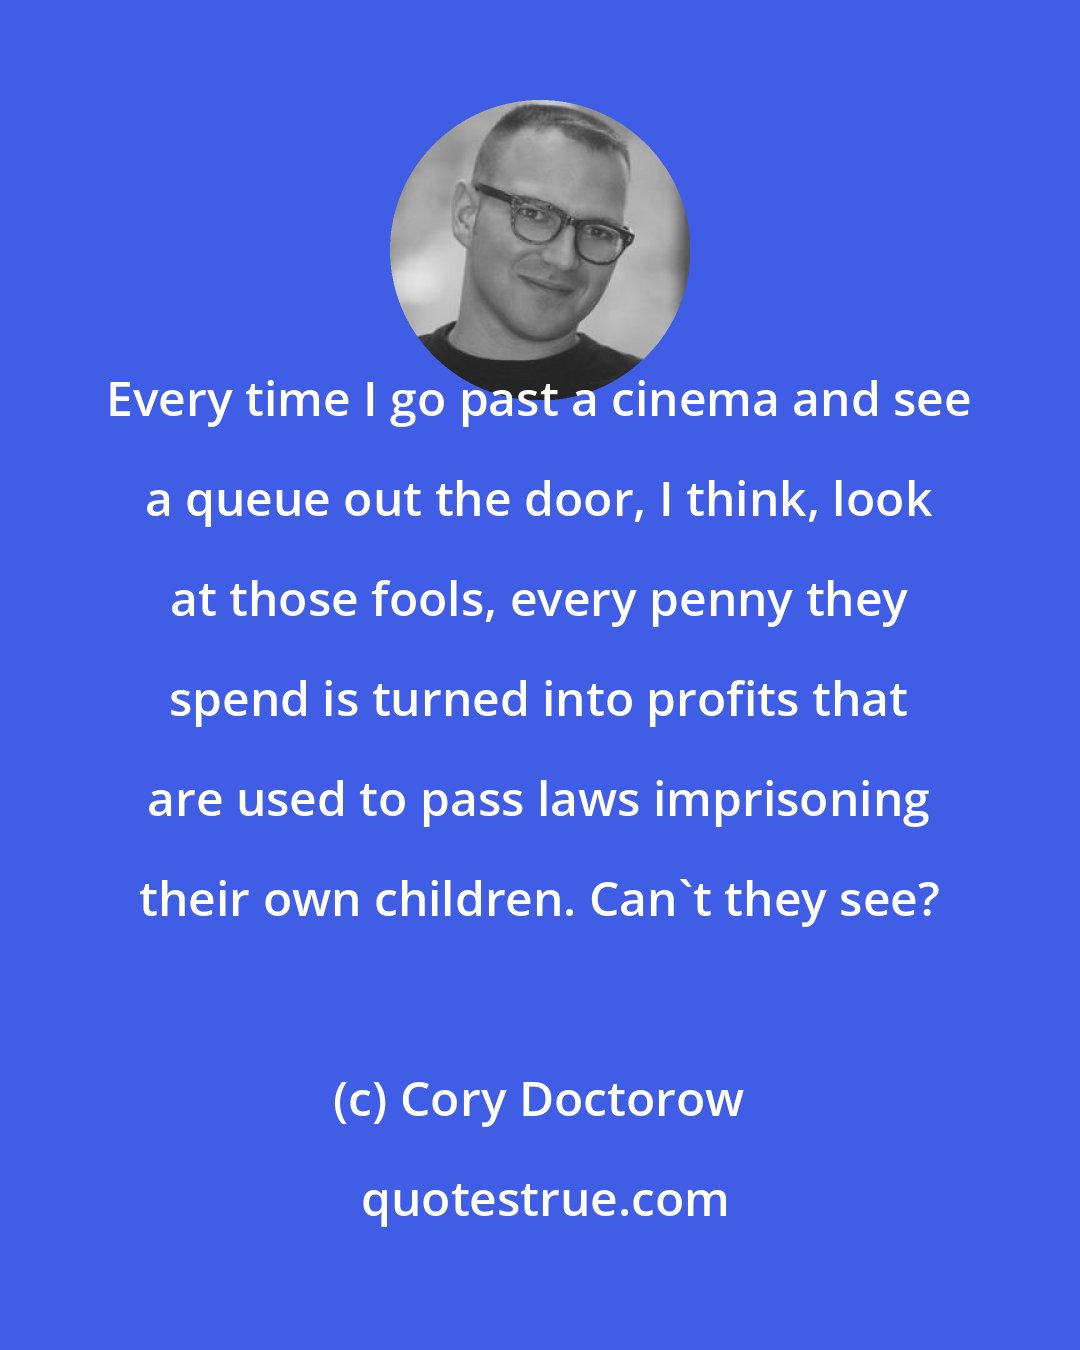 Cory Doctorow: Every time I go past a cinema and see a queue out the door, I think, look at those fools, every penny they spend is turned into profits that are used to pass laws imprisoning their own children. Can't they see?